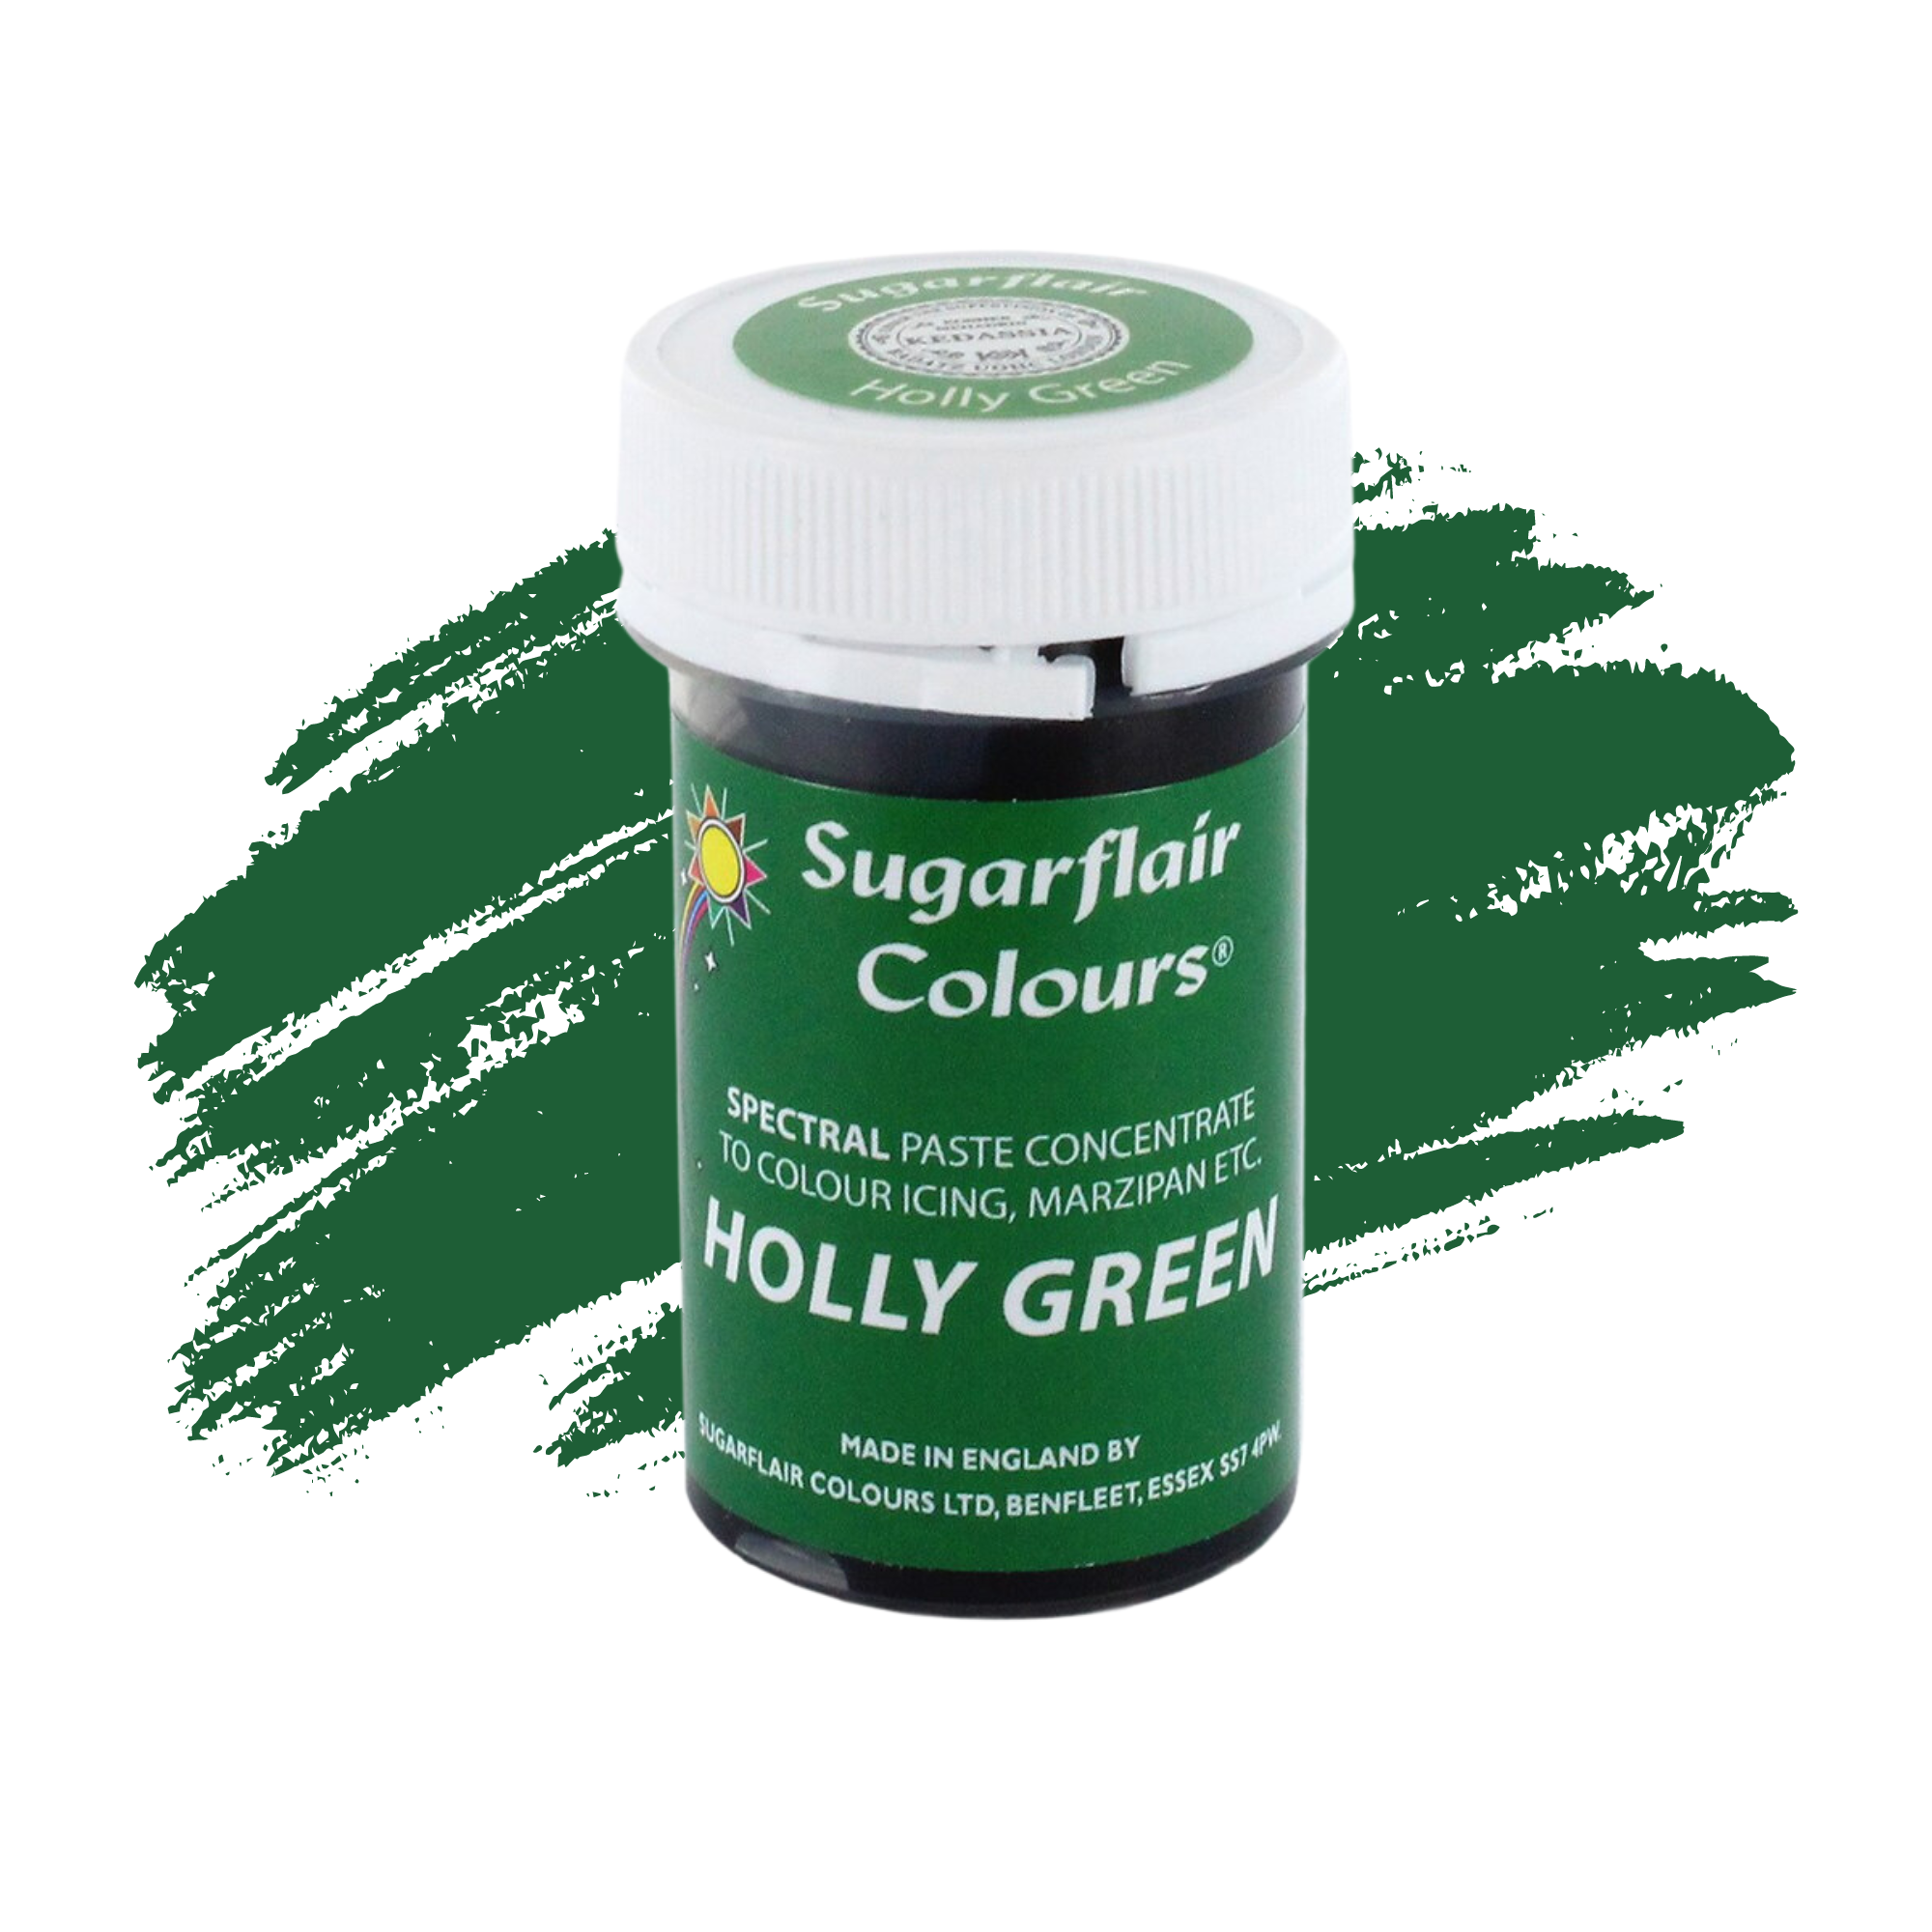 Sugarflair Paste Colours Concentrated Food Colouring - Spectral Holly Green - 25g